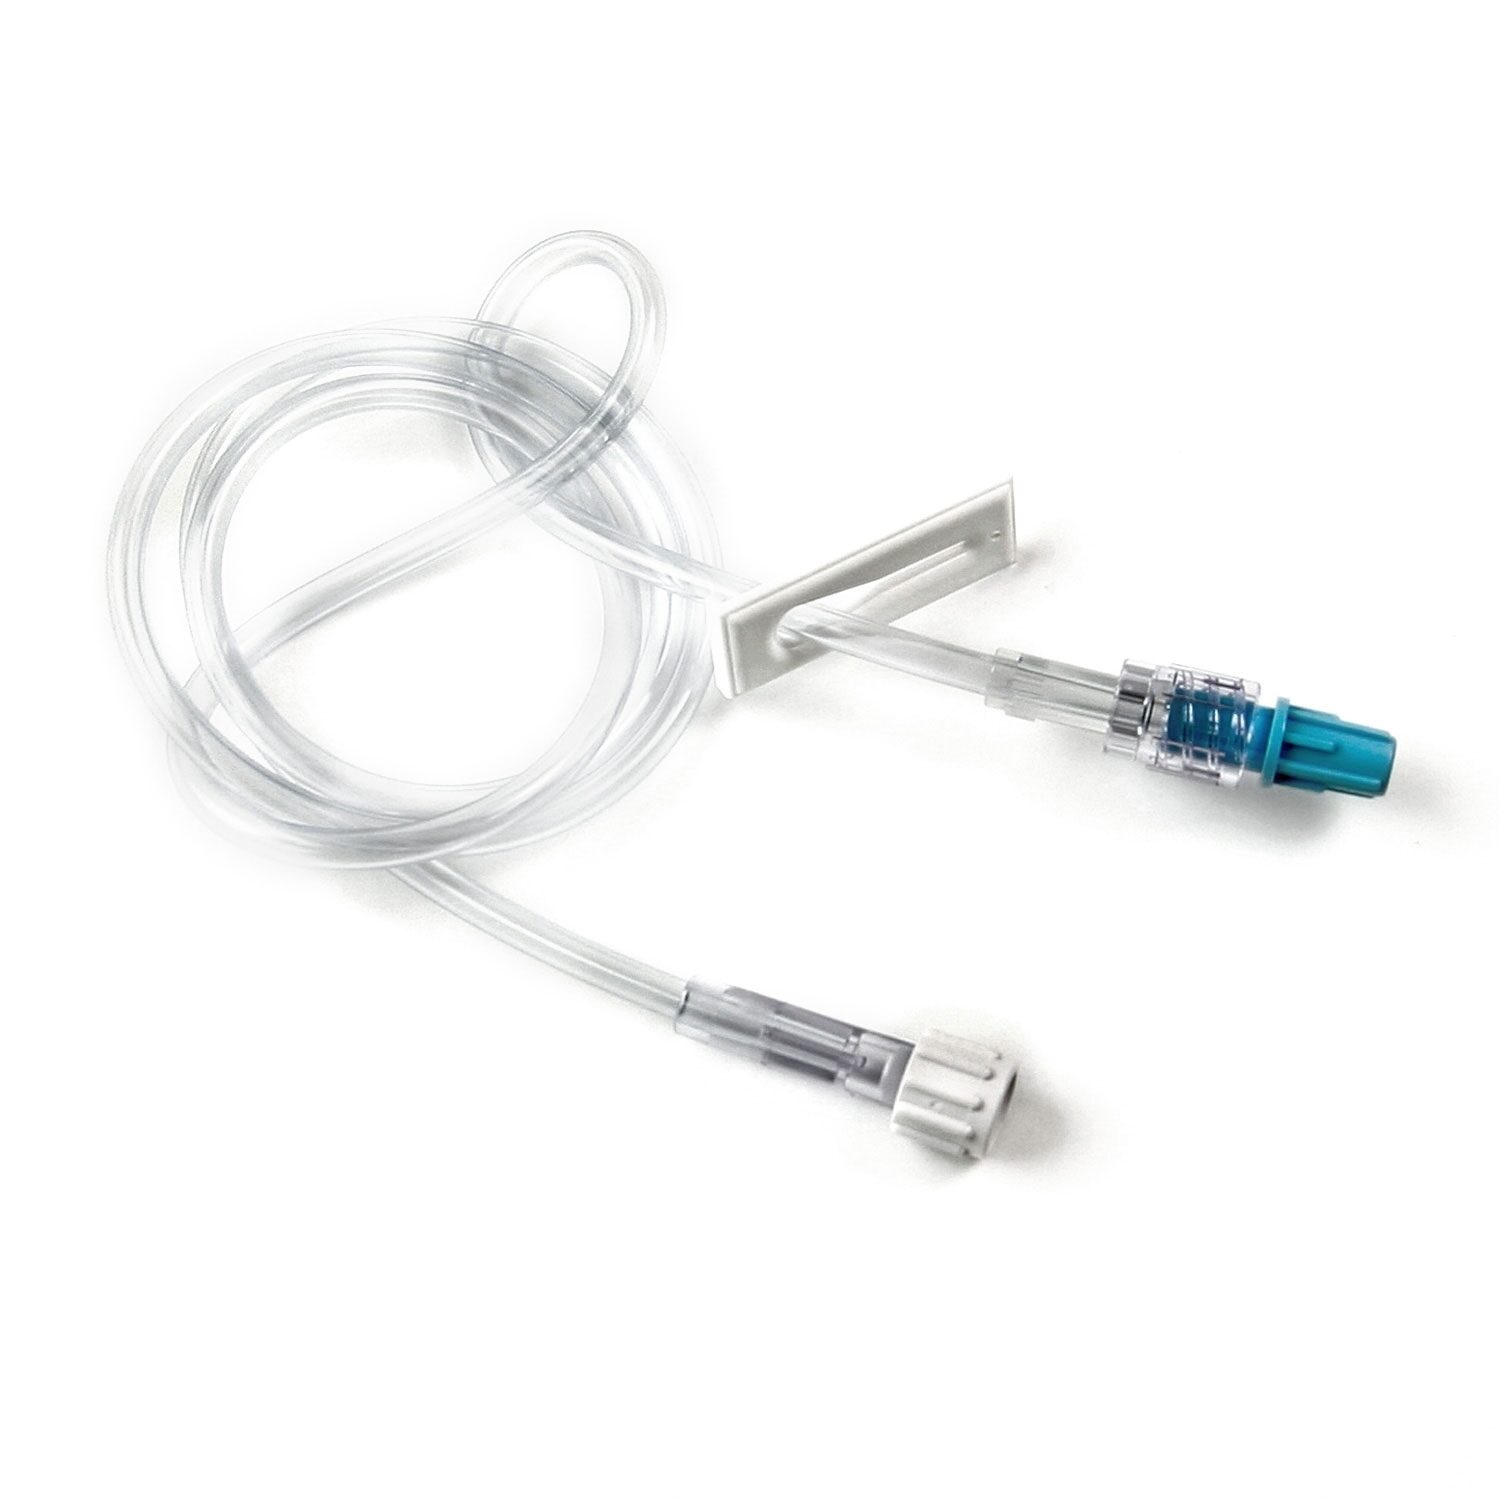 IV Extension Set, Standard Bore, Female Luer Connector, Slide Clamp,  SPIN-LOCK®, Latex-free, DEHP-free, 30, 100/Case